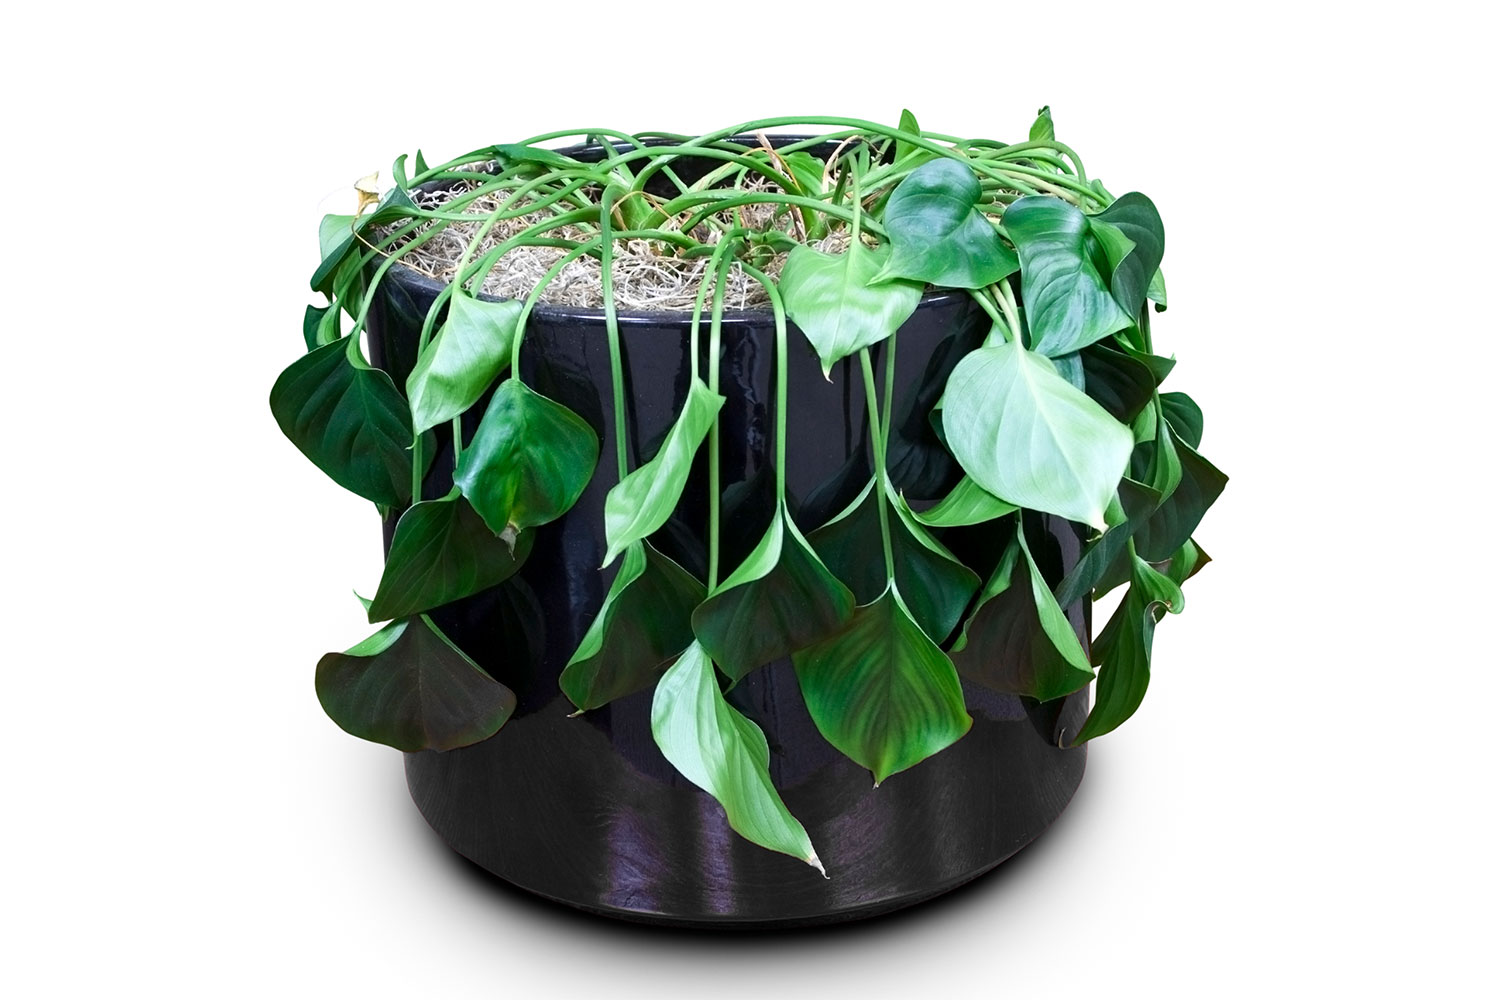 How To Save A Dying Plant Better Homes And Gardens,Best Charging Station For Multiple Devices Uk